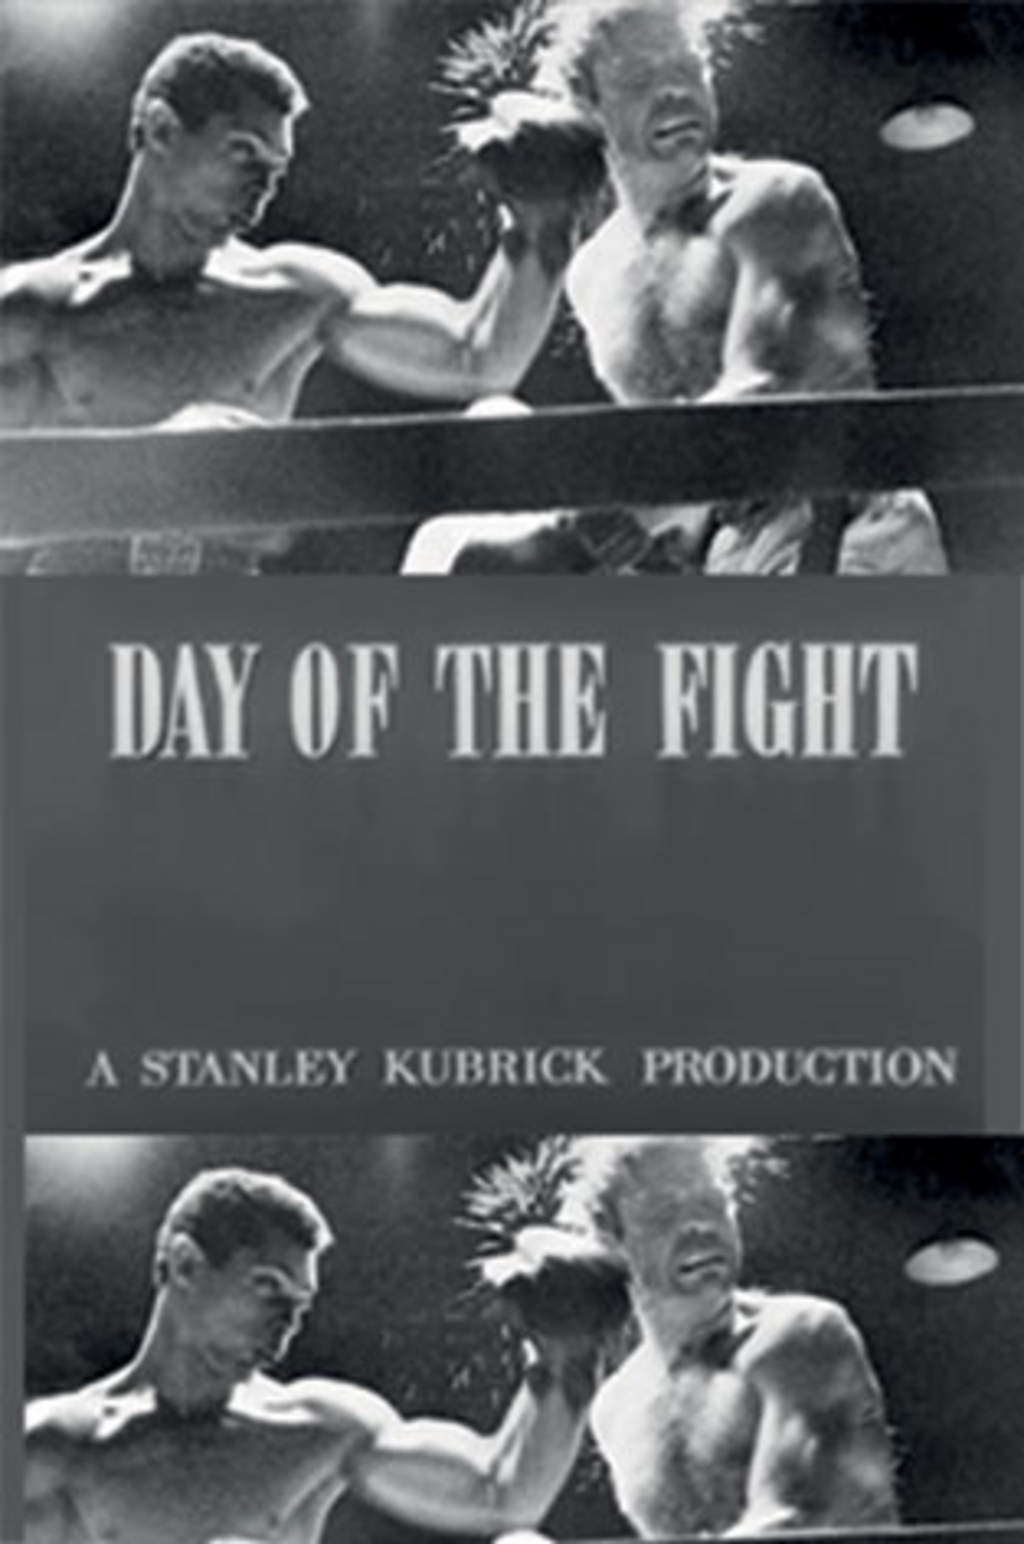 Day of Fight.
